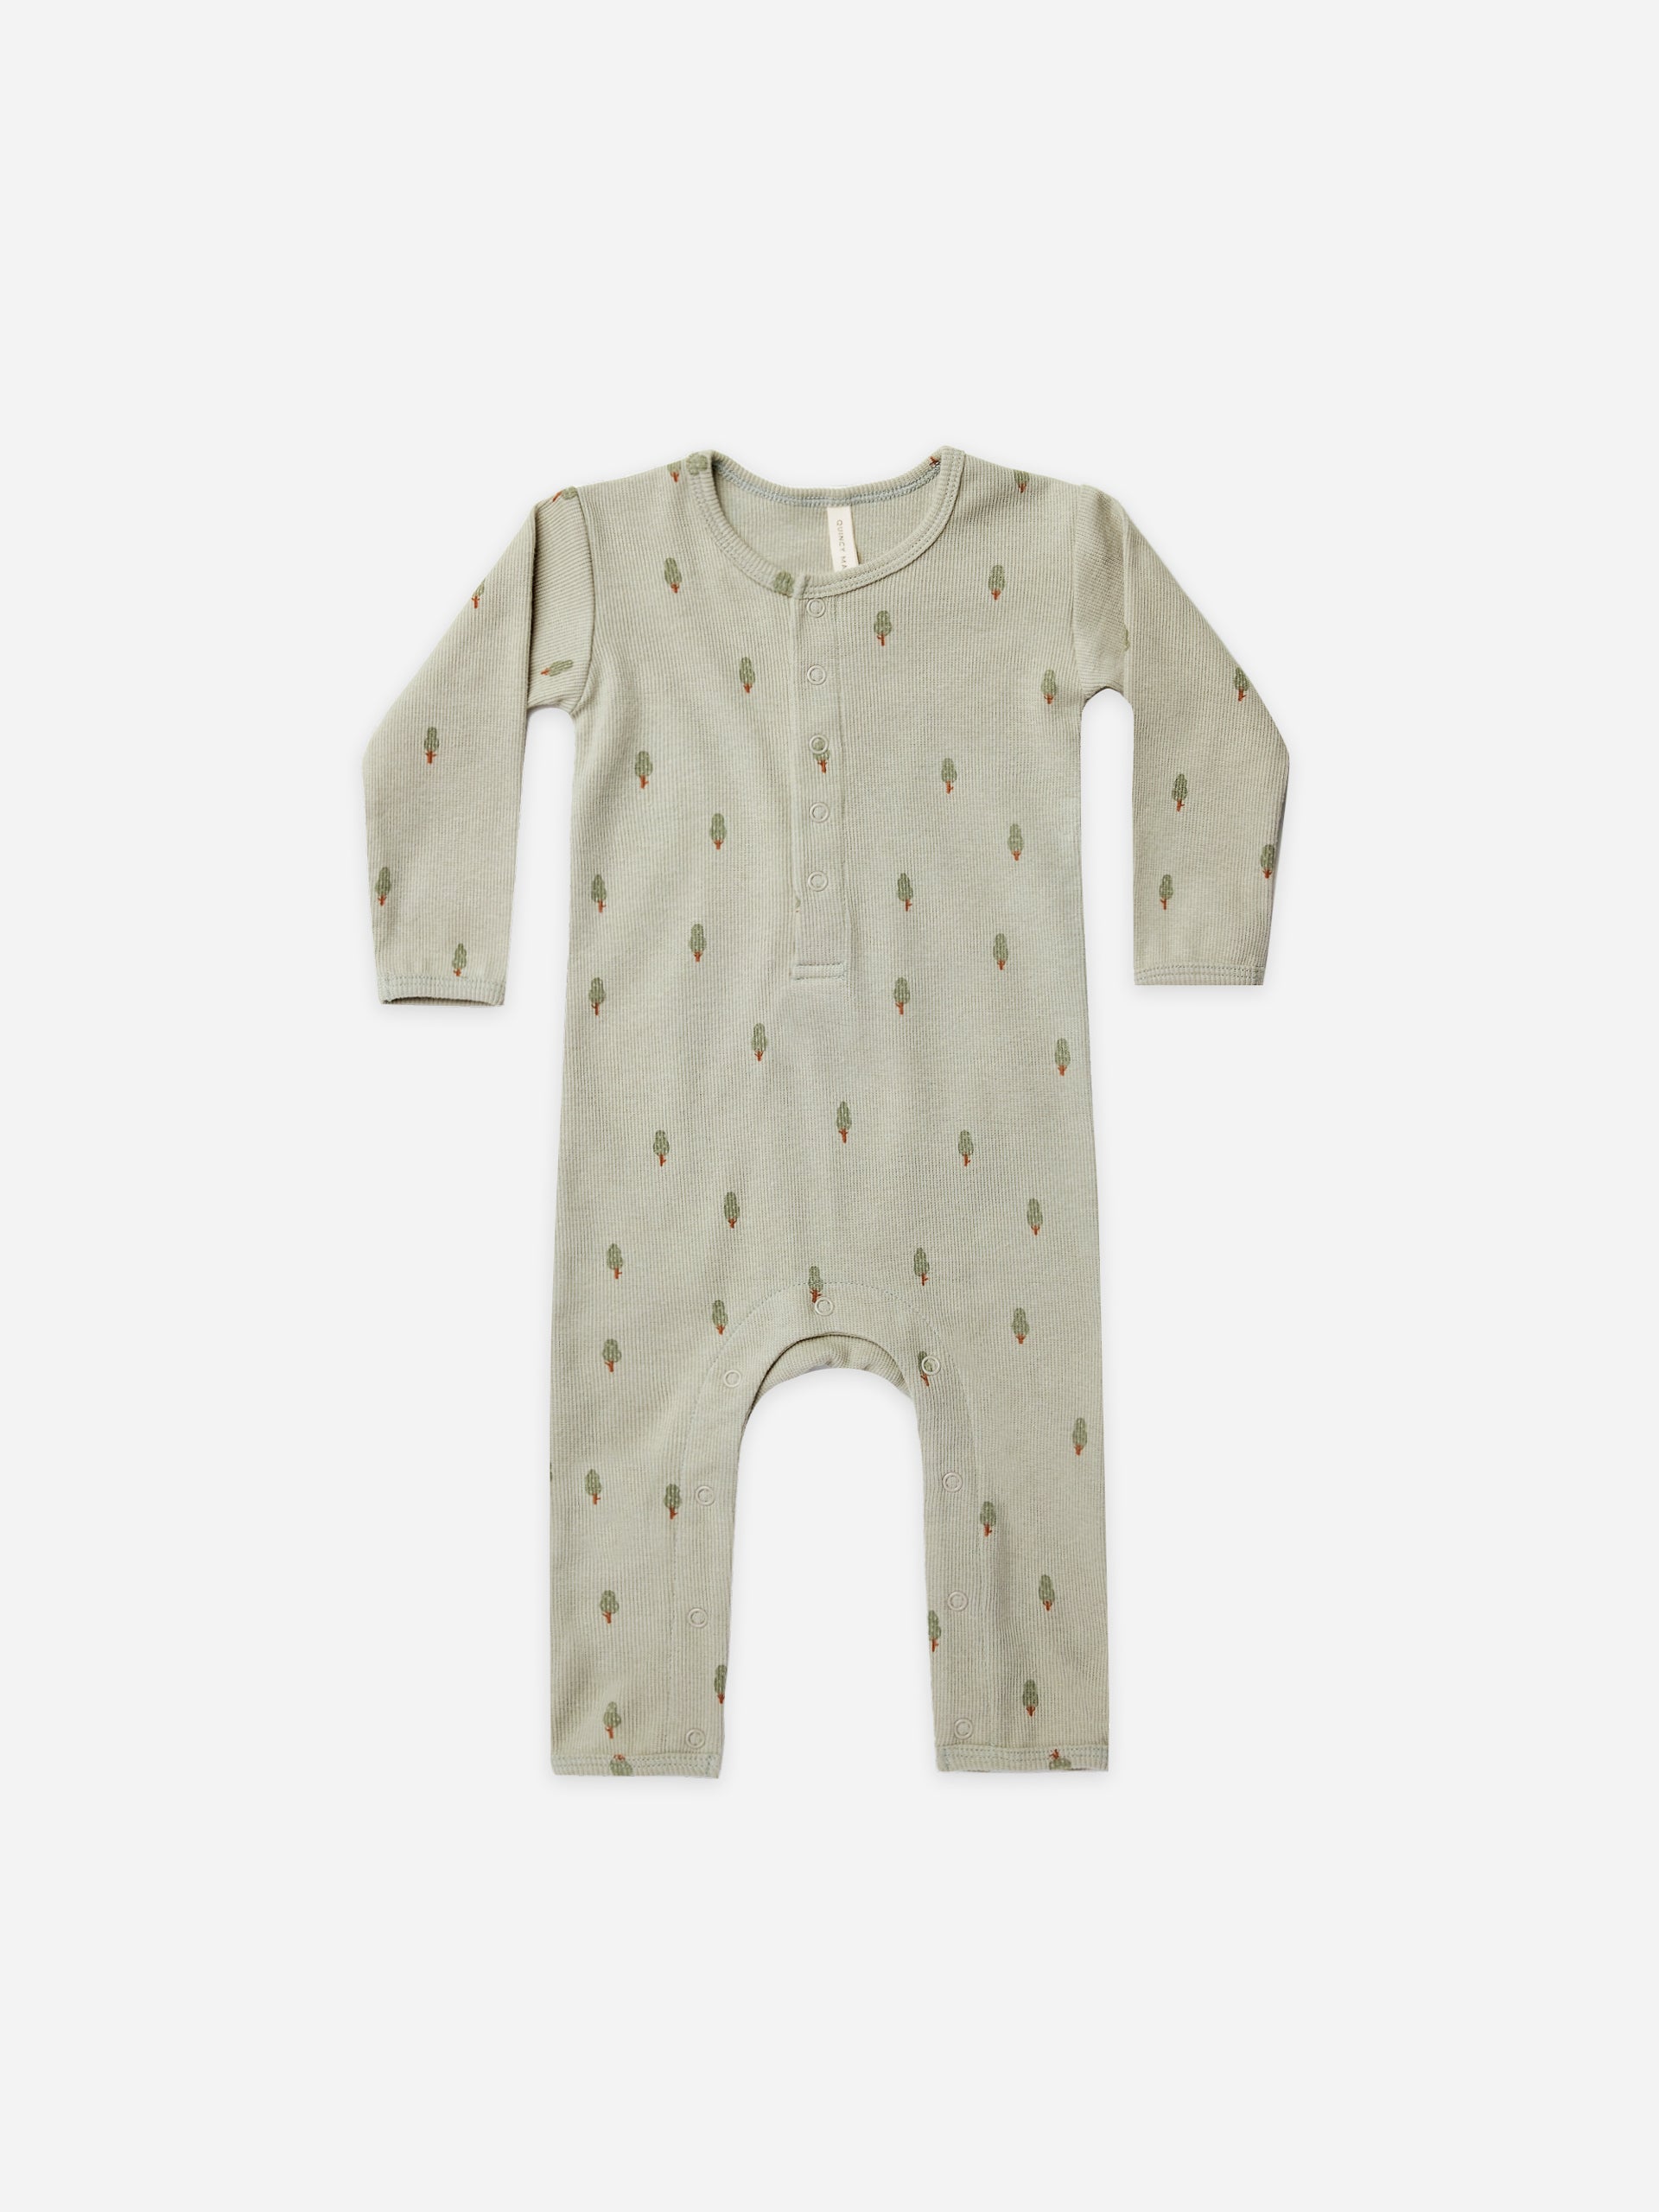 ribbed baby jumpsuit | trees - Quincy Mae | Baby Basics | Baby Clothing | Organic Baby Clothes | Modern Baby Boy Clothes |